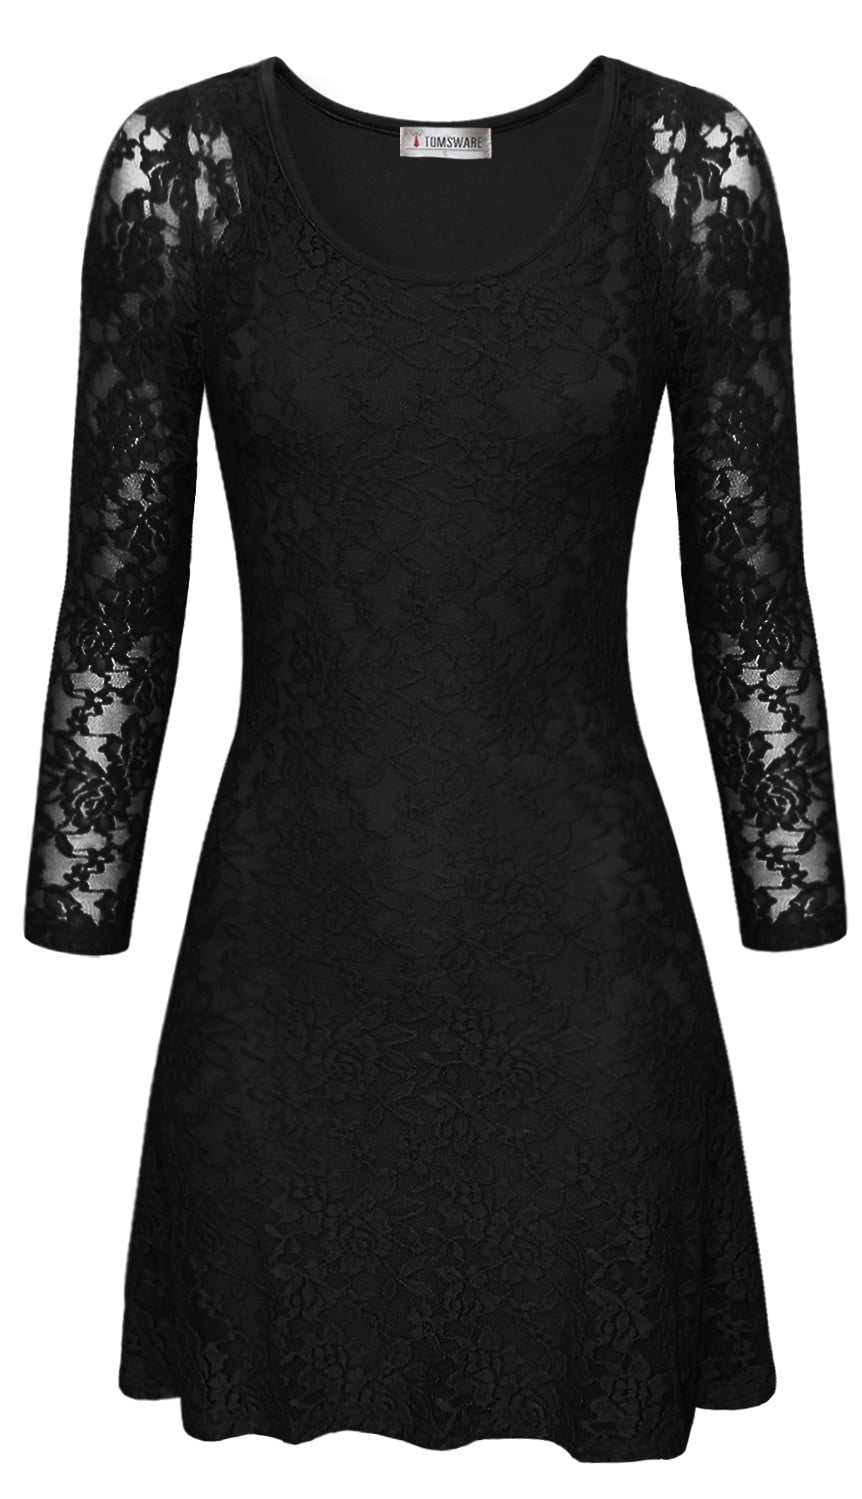 TAM WARE Women Stylish Floral Lace Long Sleeve Scoop Neck Flare Dress ...